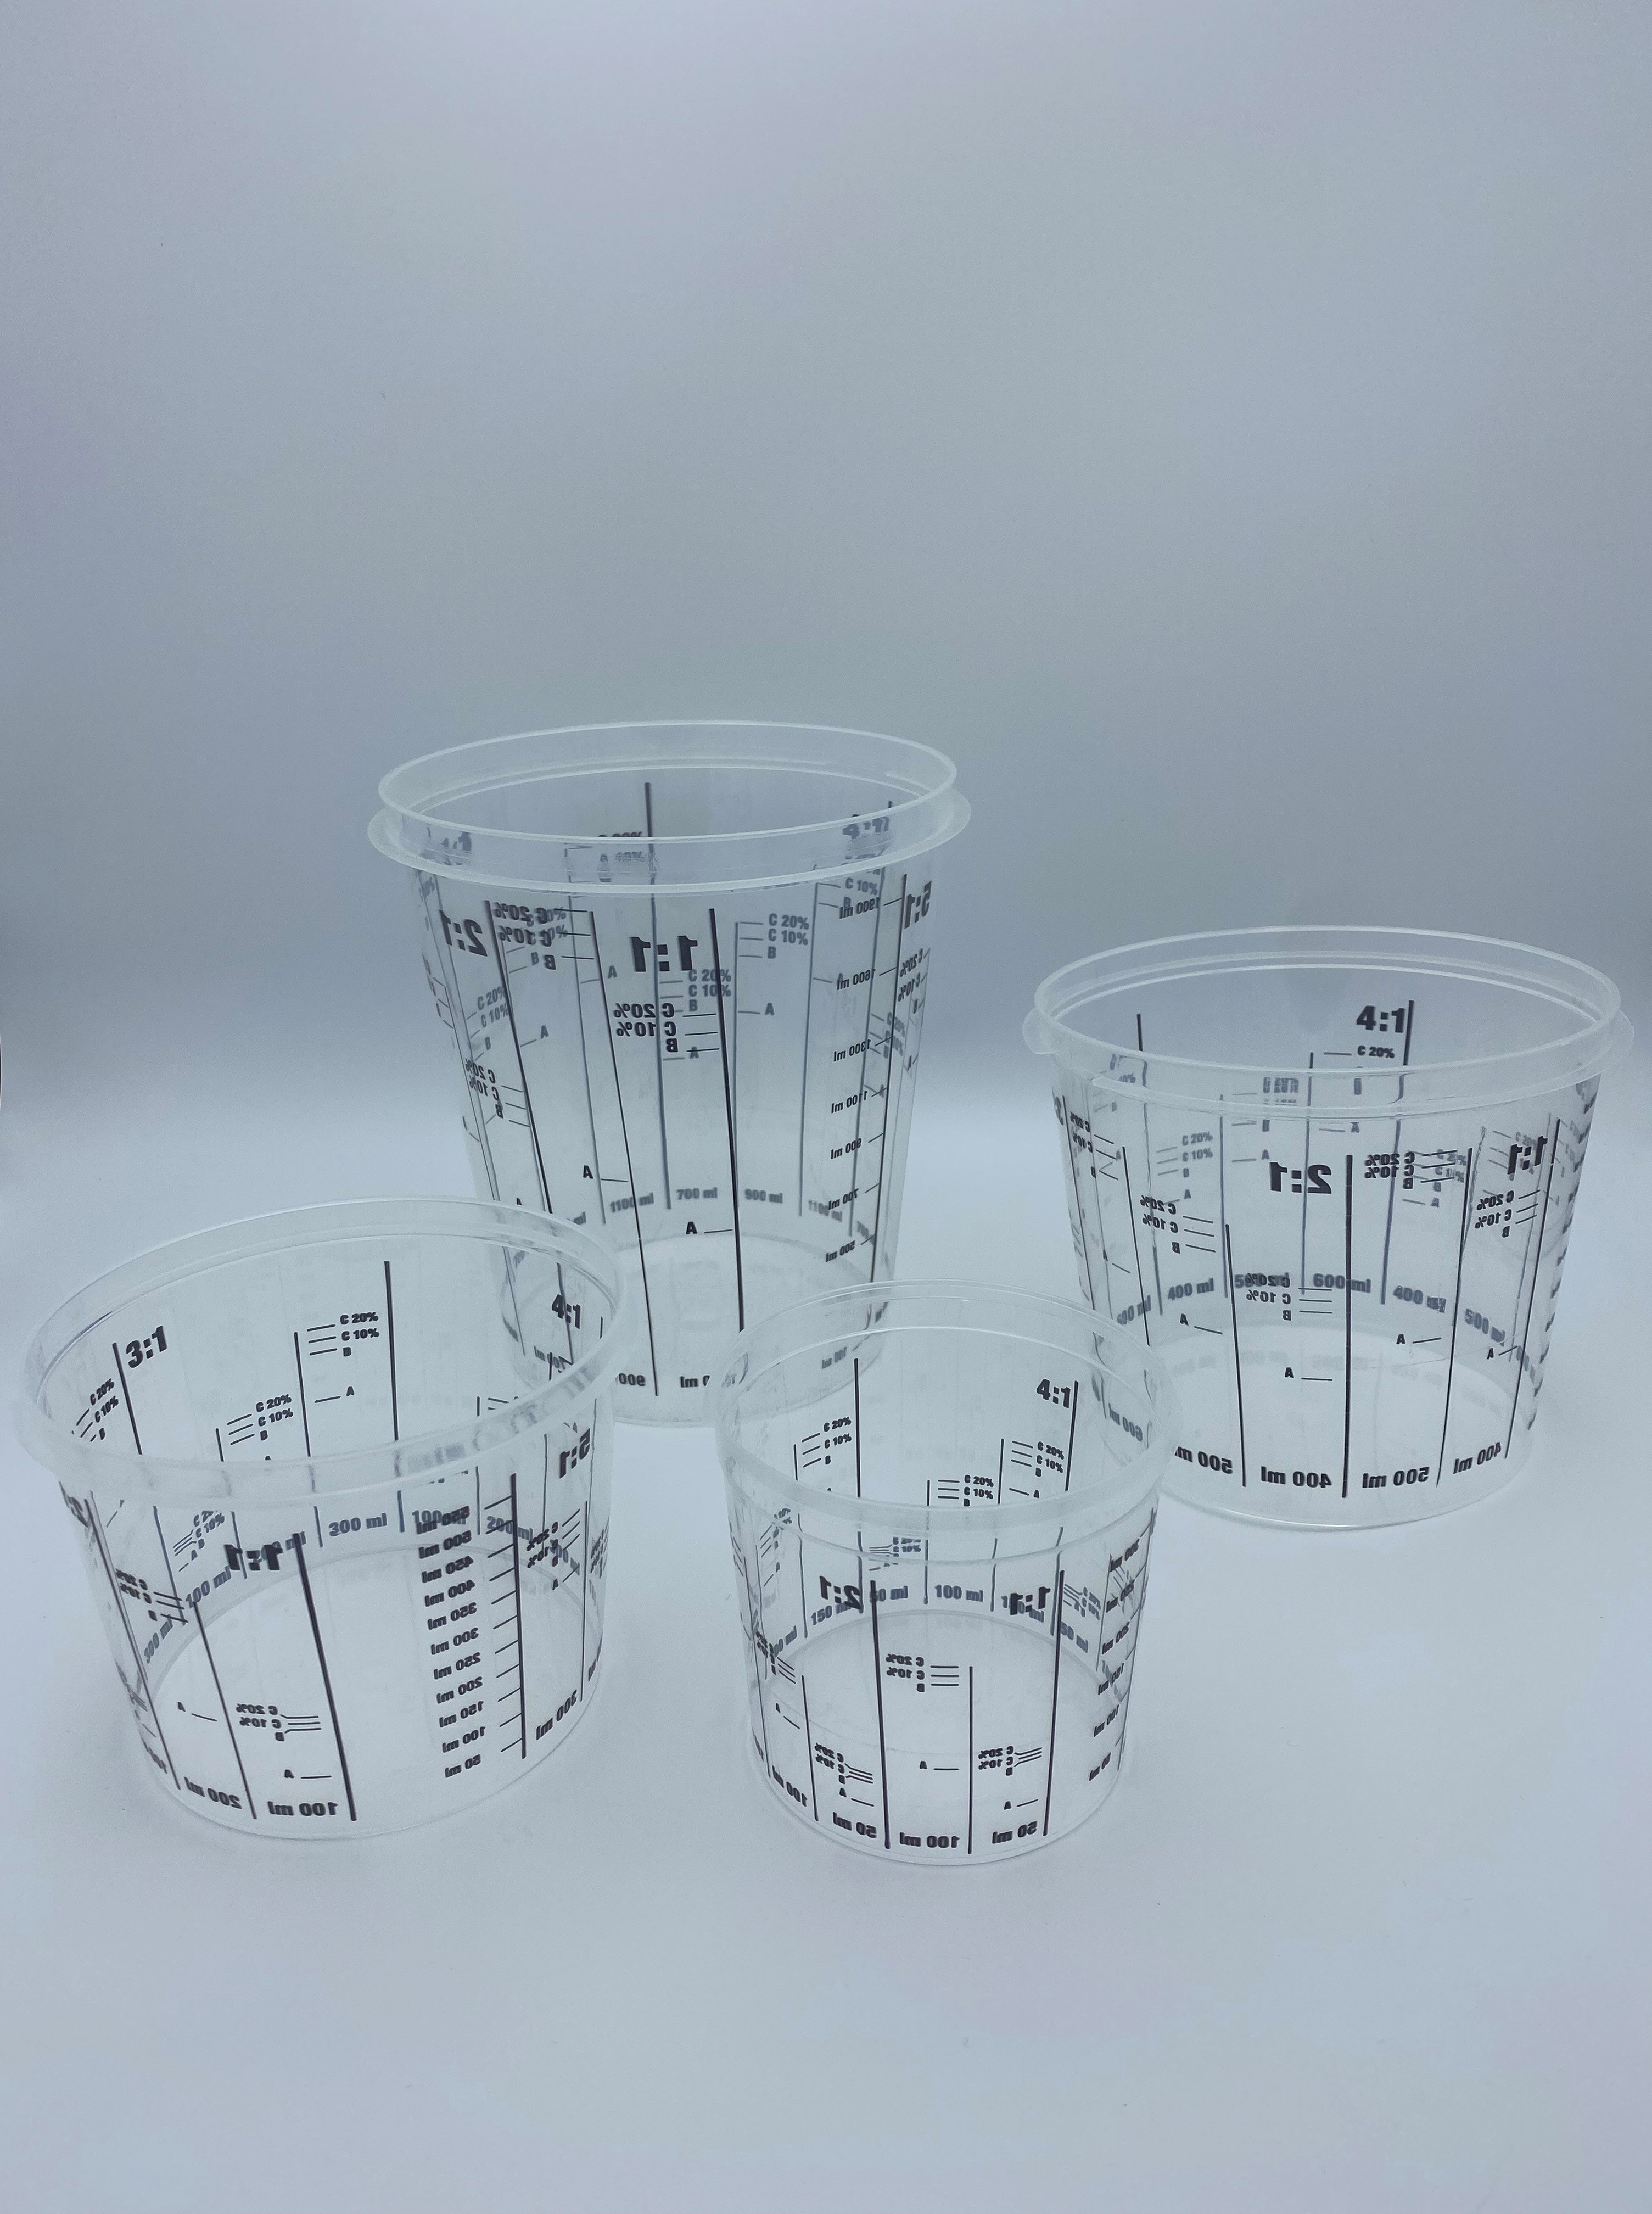 Graduated Mixing Cup - 750 mL